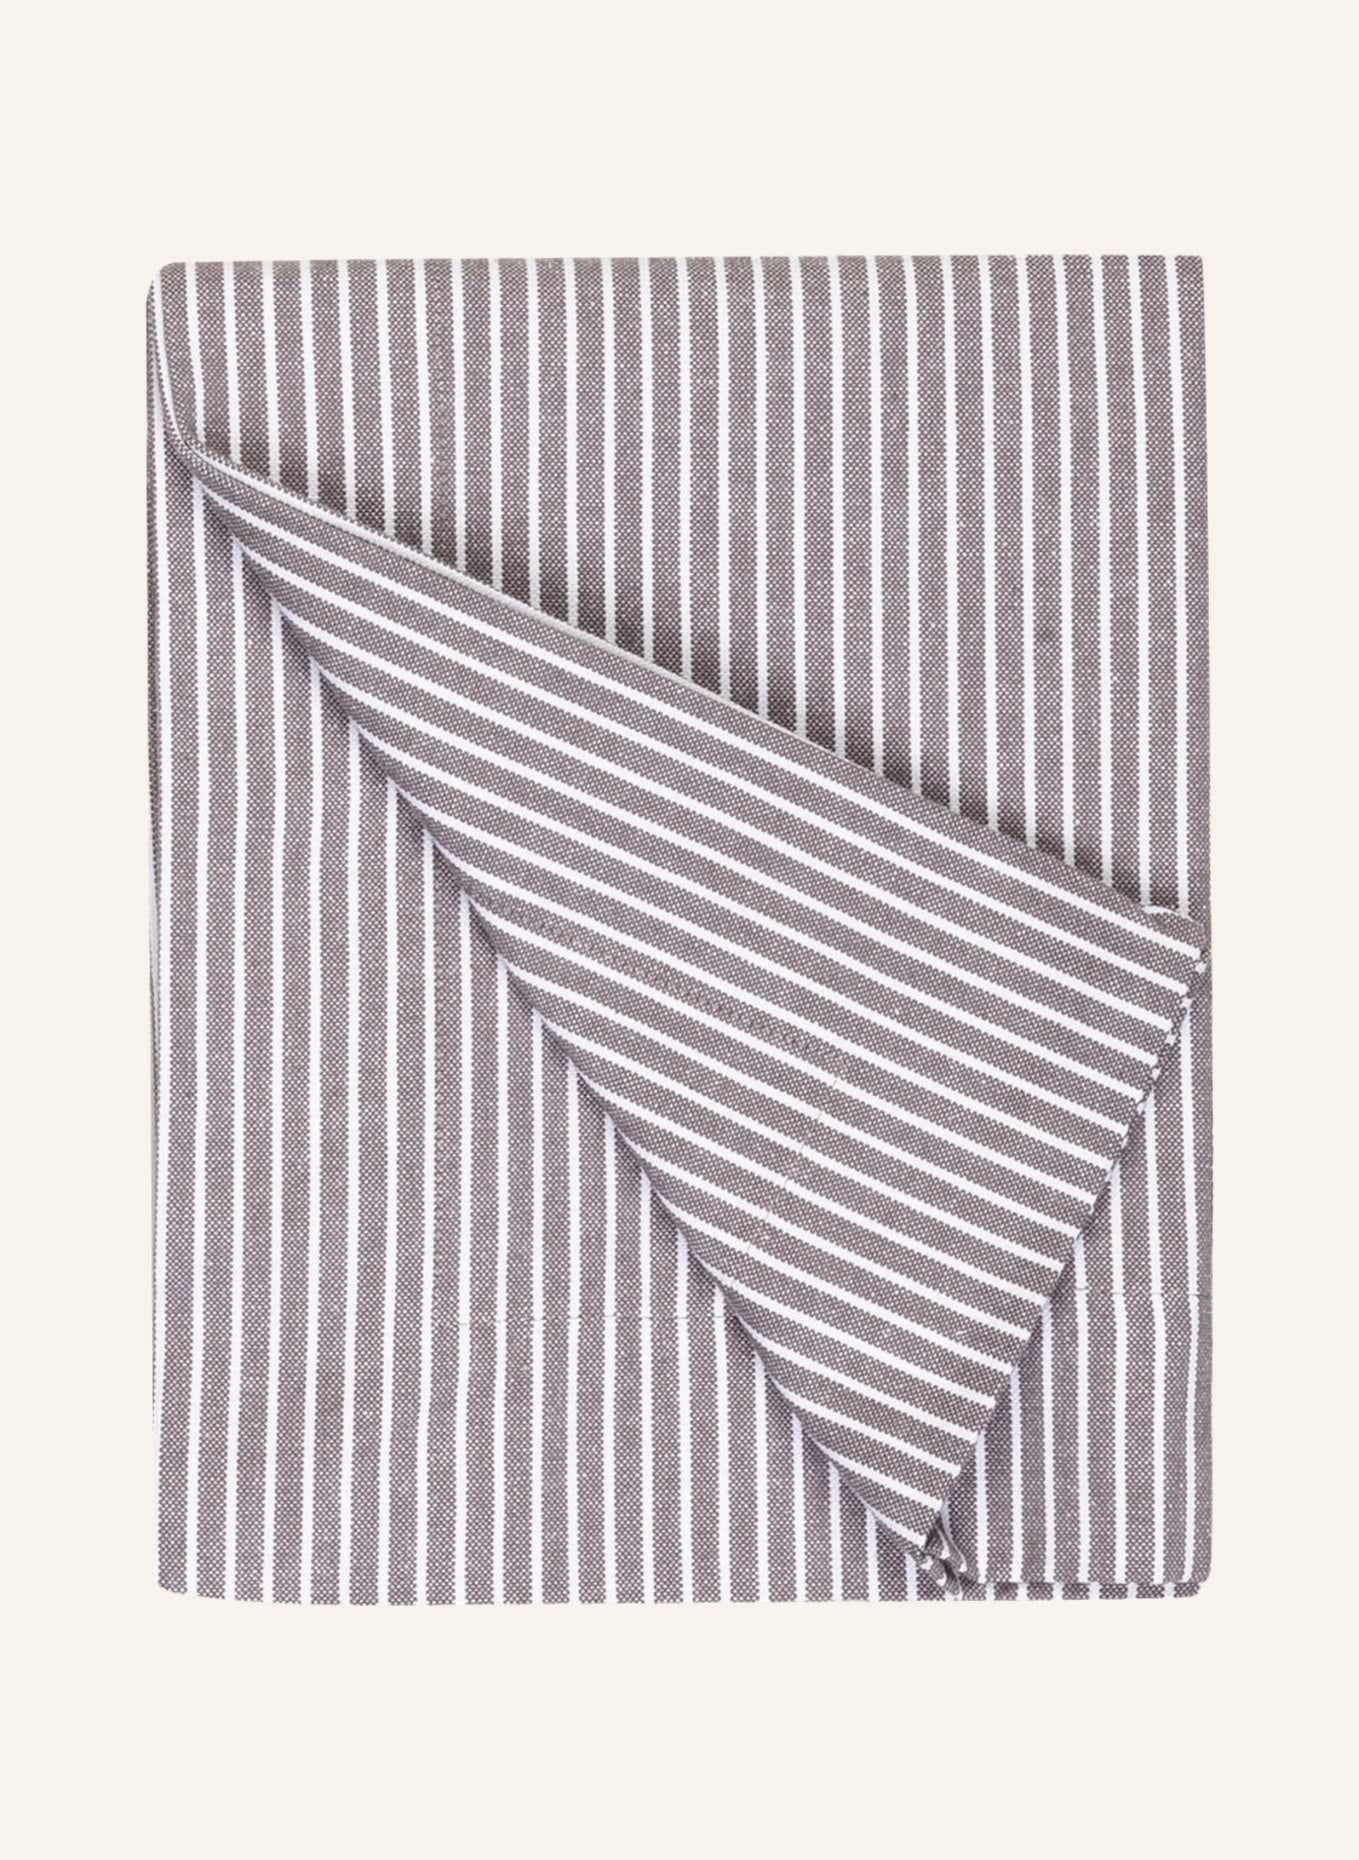 Marc O'Polo Table runner TENSTRA, Color: LIGHT GRAY / WHITE STRIPED (Image 1)